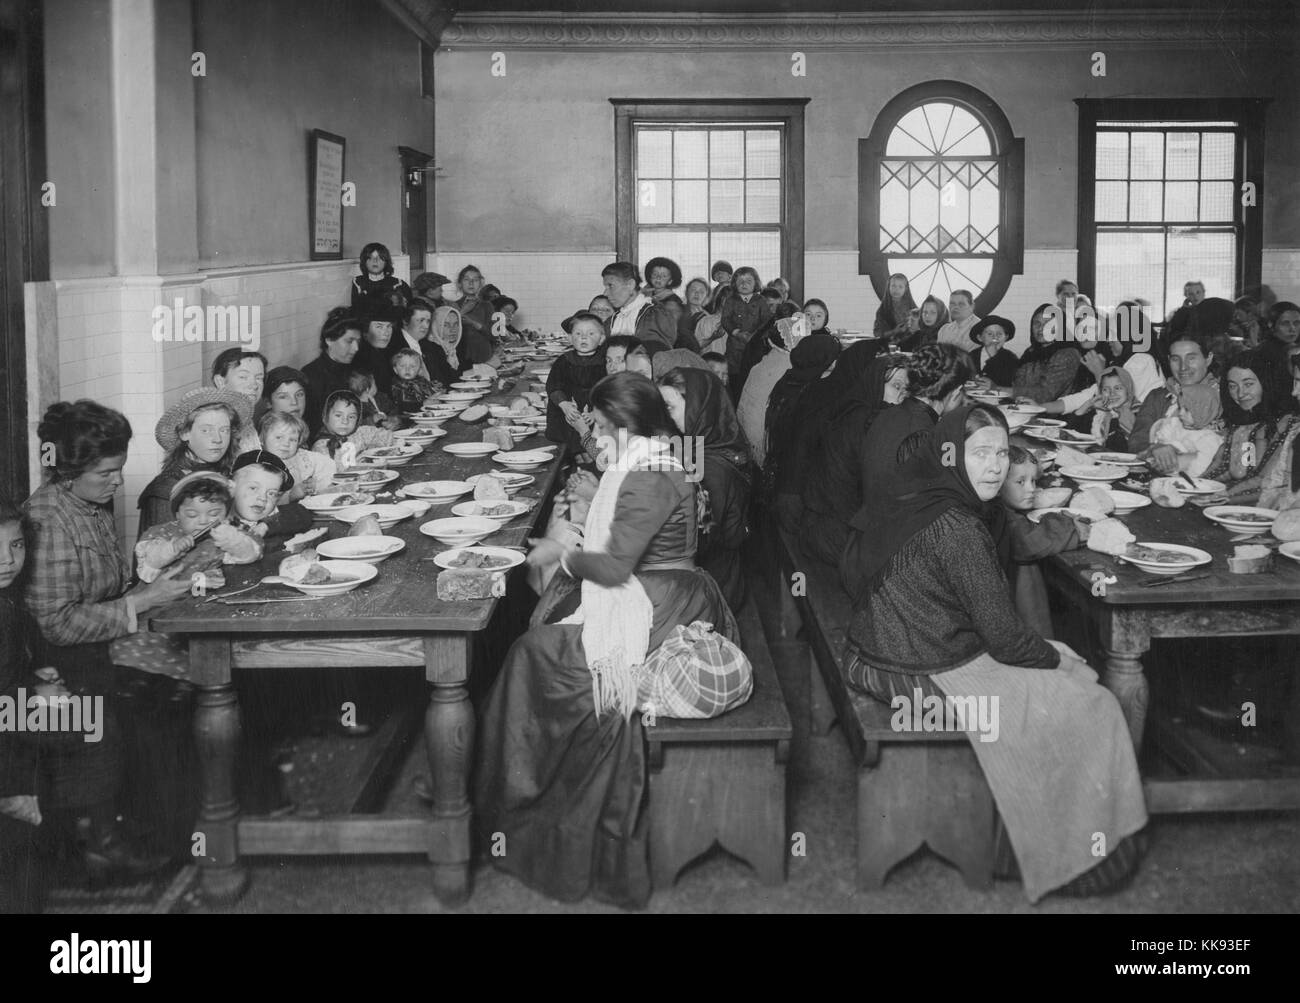 A photograph of a large group of women and children eating a meal on Ellis Island, the long wooden tables are very close together to accommodate as many people as possible in this dining hall, free meals were provided to immigrants and packaged goods were also available for sale to eat between meal times and for immigrants to take away when they left Ellis Island, New York, 1907. From the New York Public Library. Stock Photo